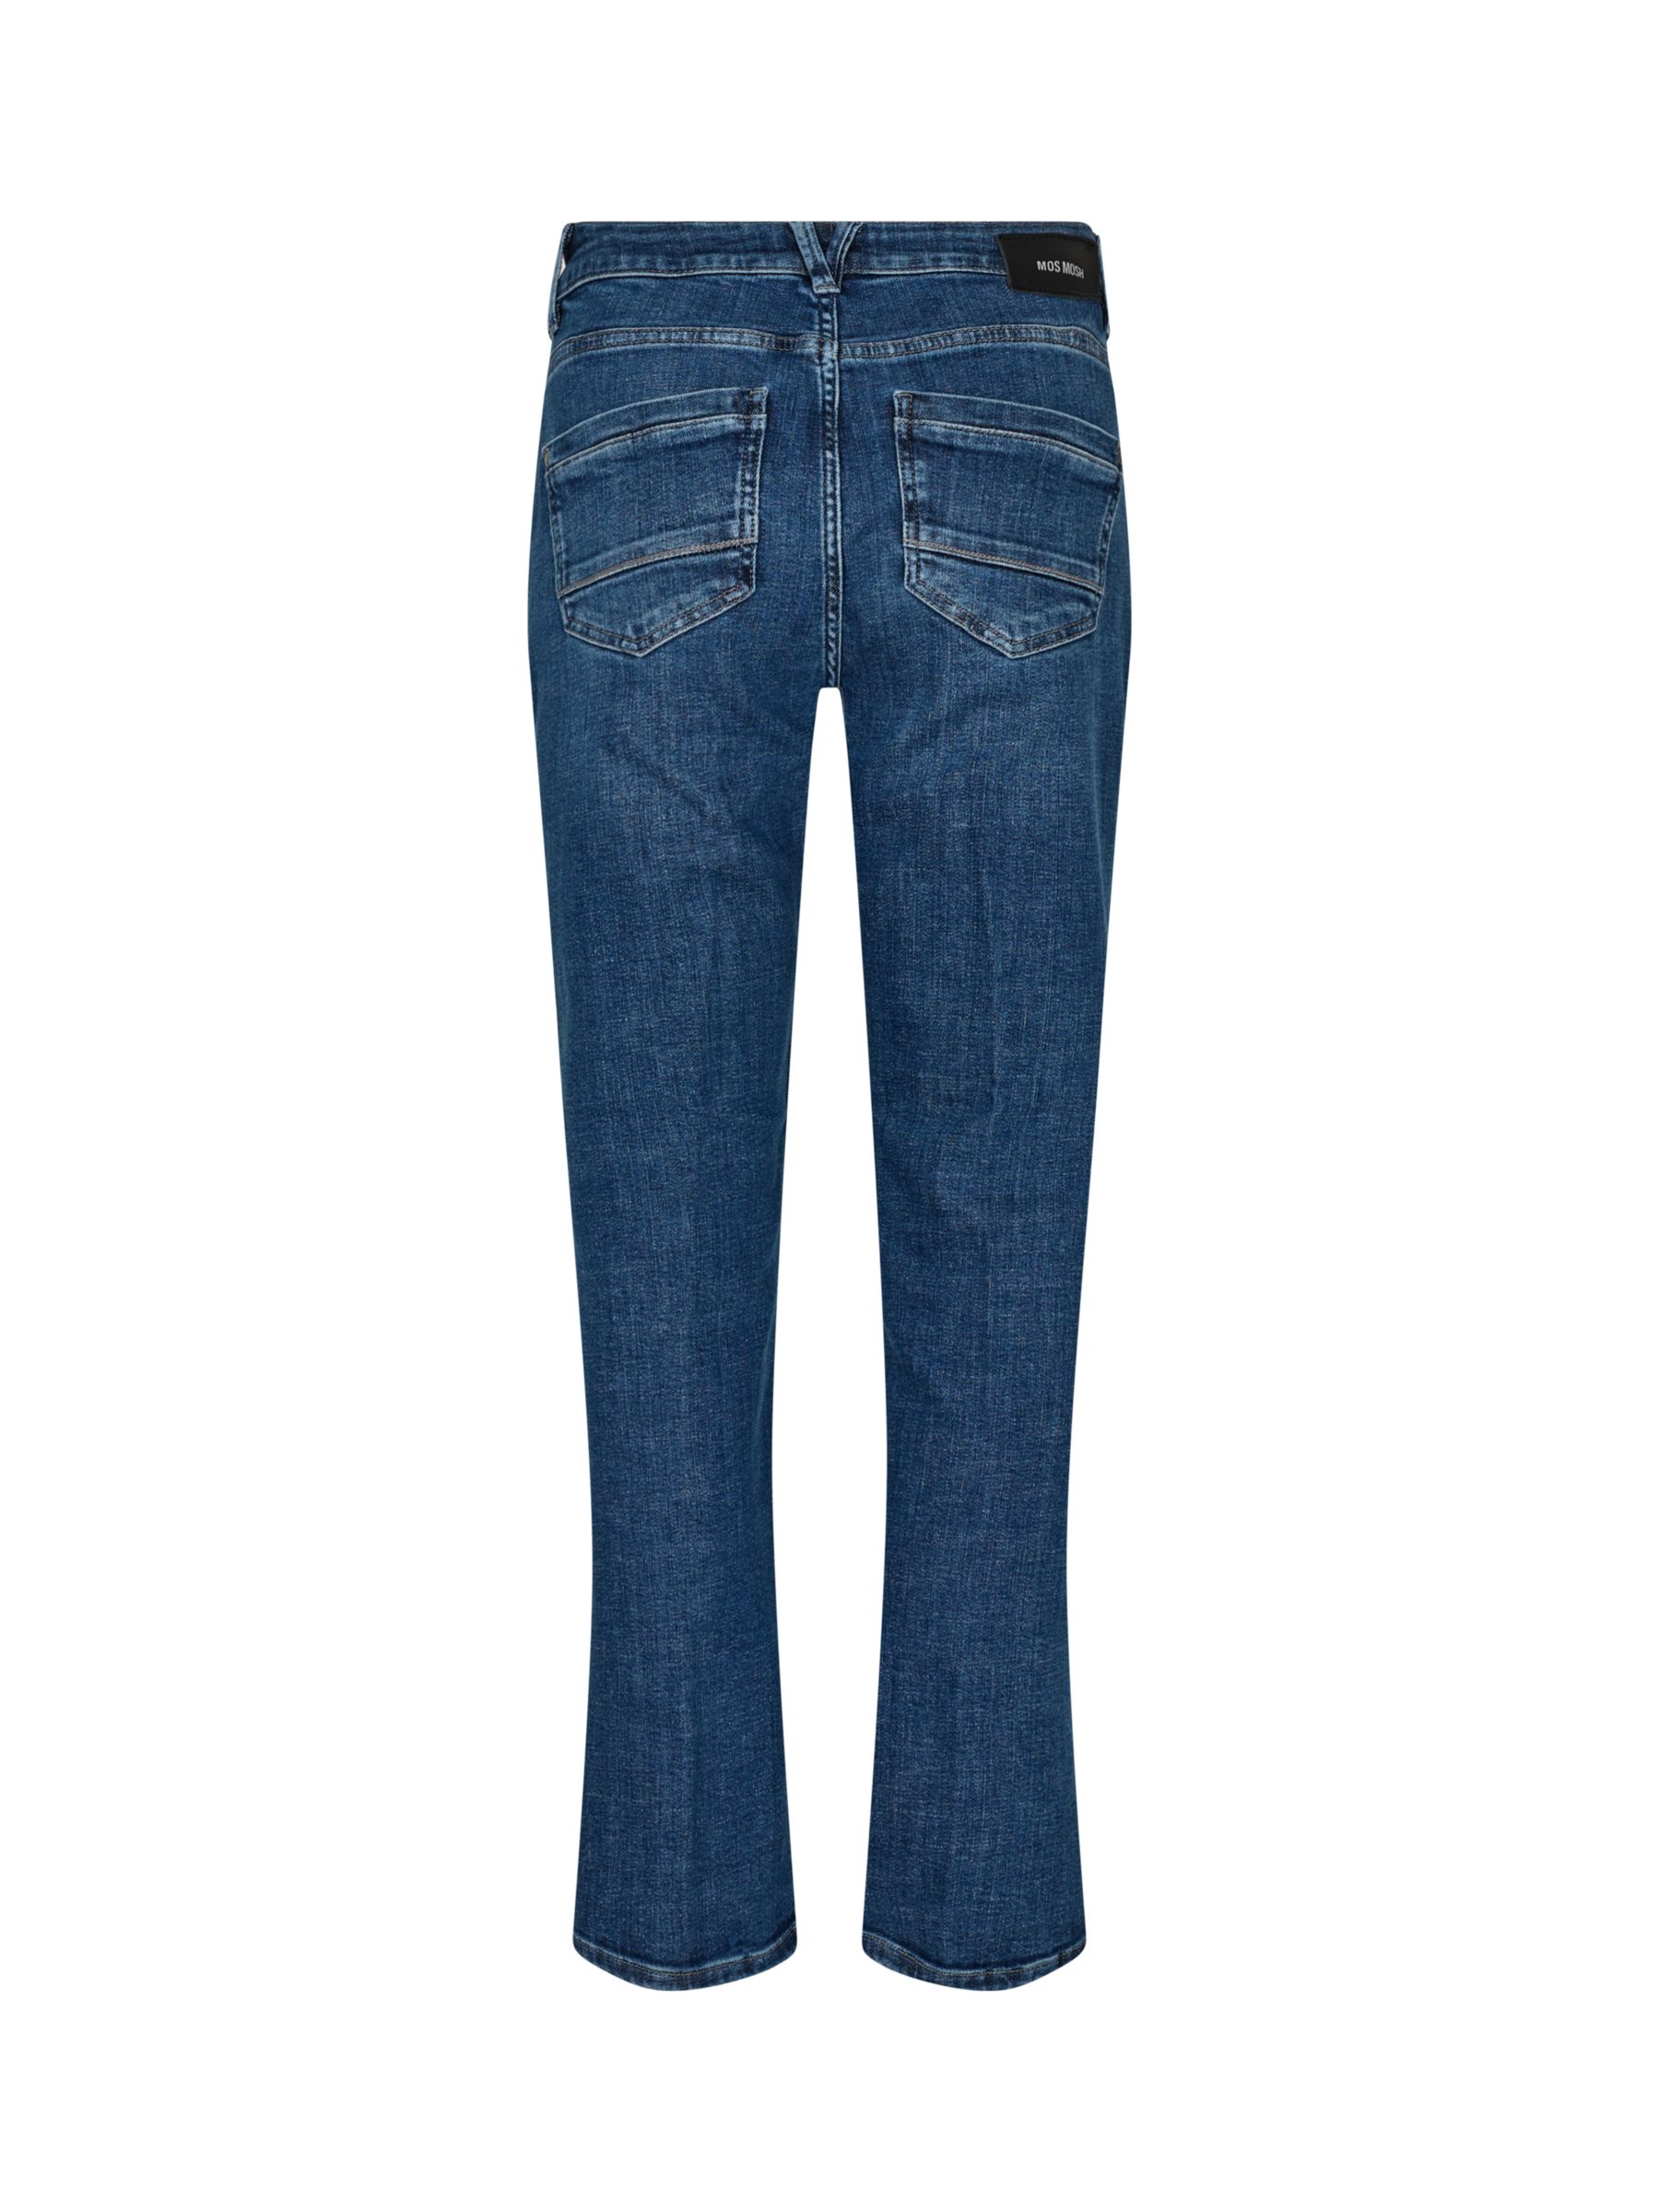 Buy MOS MOSH Everest Ave Mid Rise Straight Jeans, Blue Online at johnlewis.com